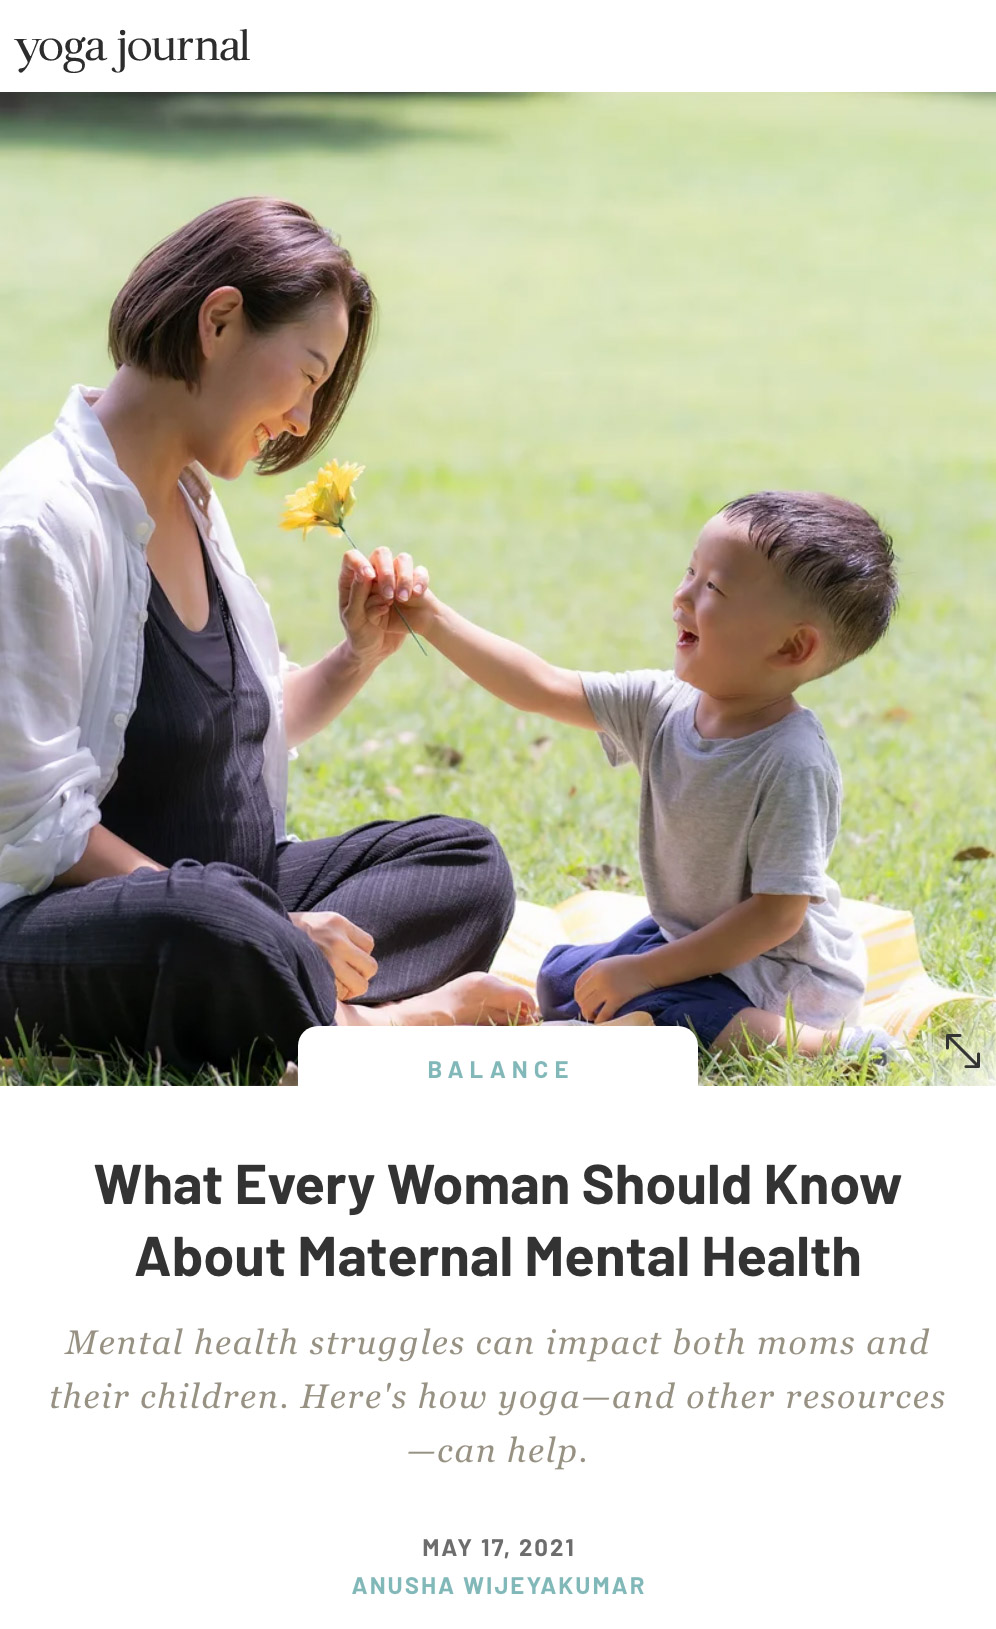 What Every Woman Should Know About Maternal Mental Health